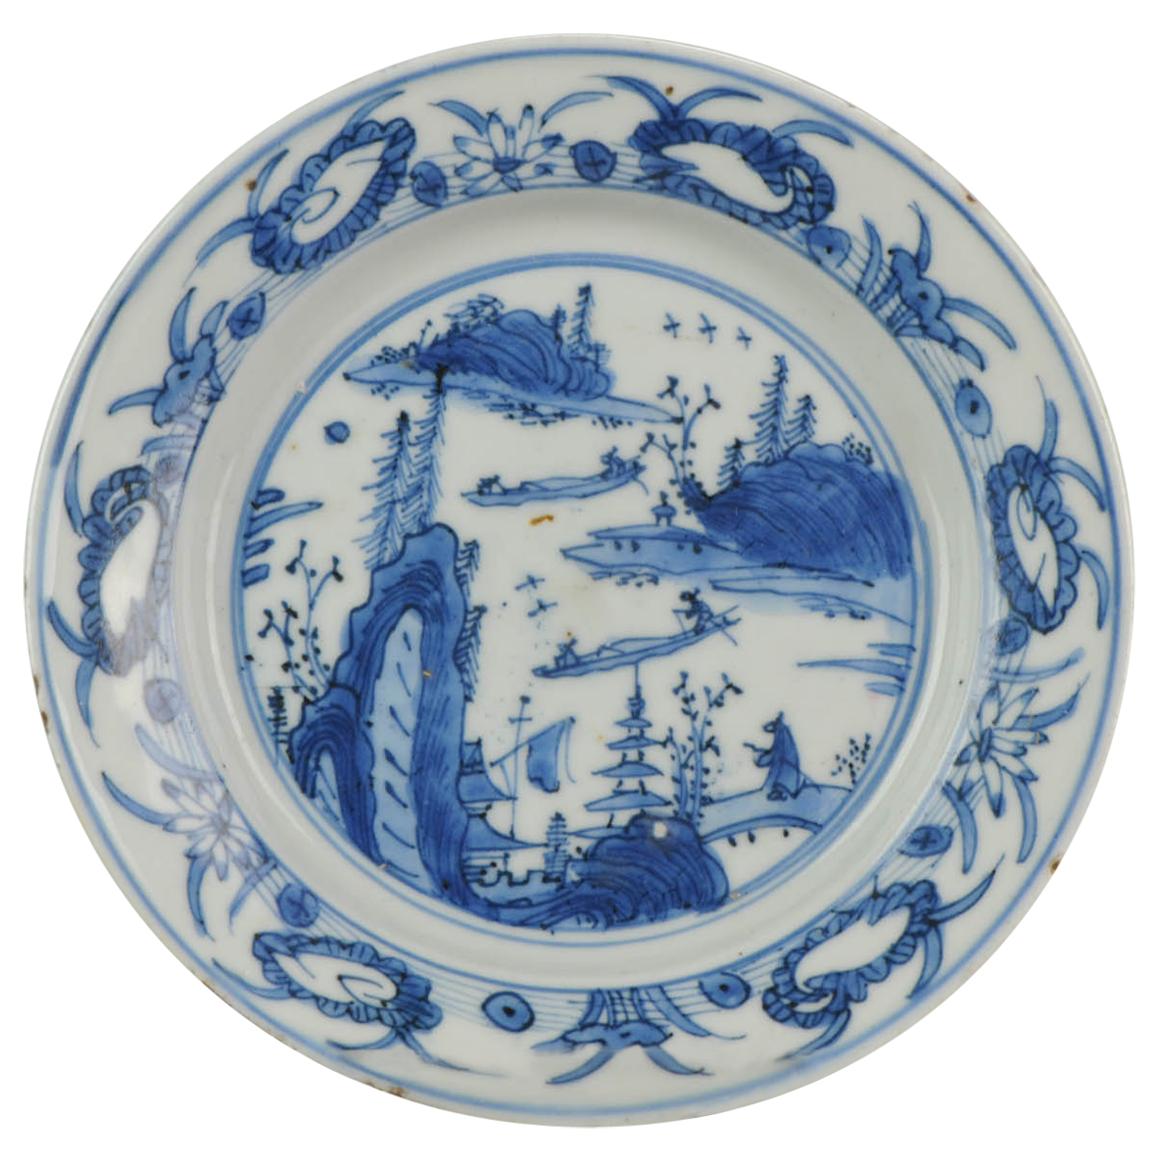 Antique Chinese Porcelain Ming 1540-1580 Jiajing Wanli Landscape Plate with Bird For Sale